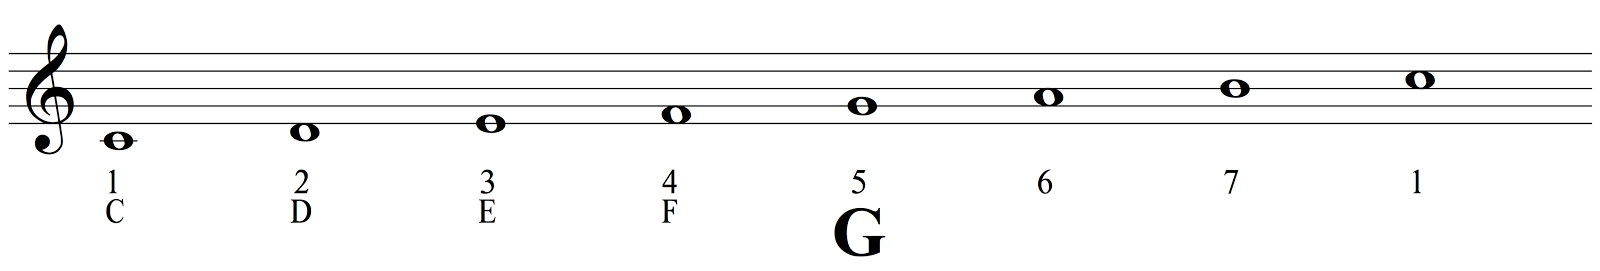 Counting Up To The Fifth From The Tonic In C Major